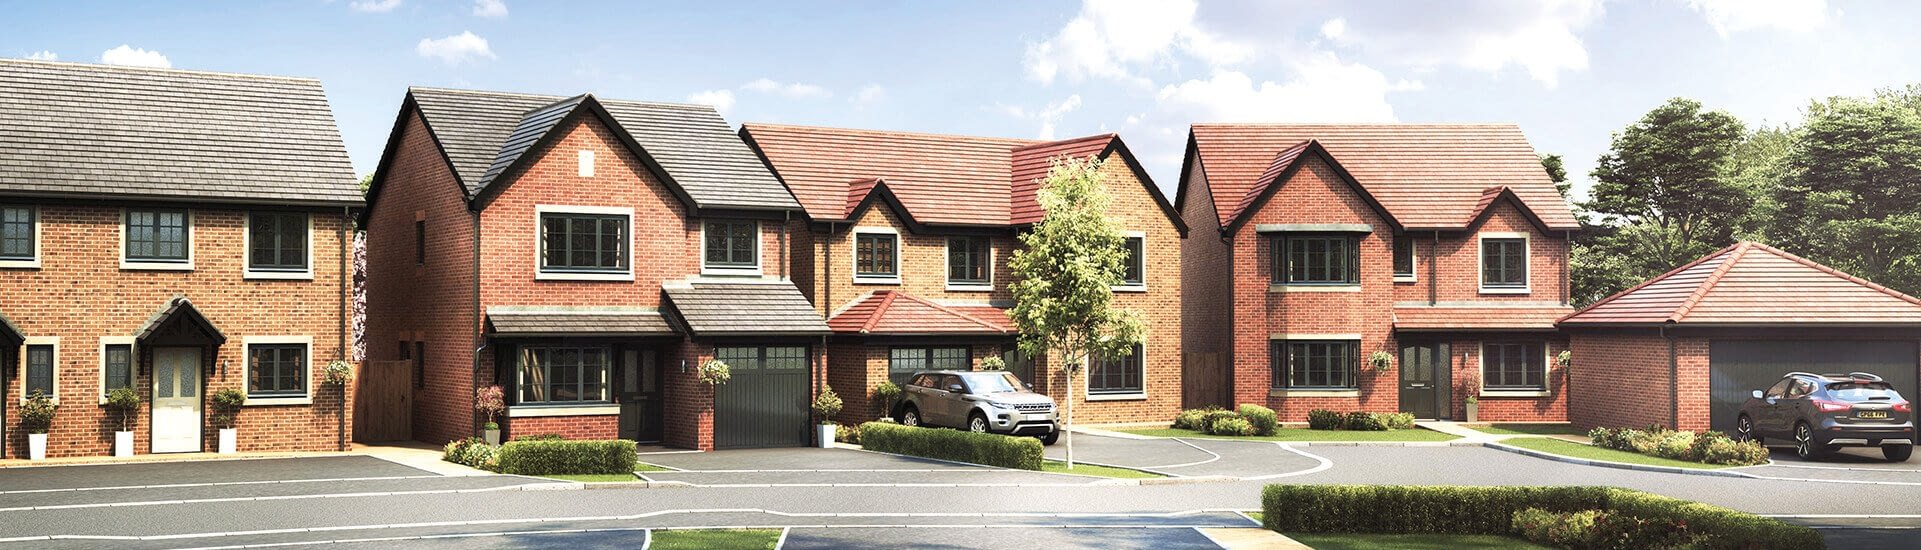 Pick a prime plot at Hawtree Grove! New homes in Southport